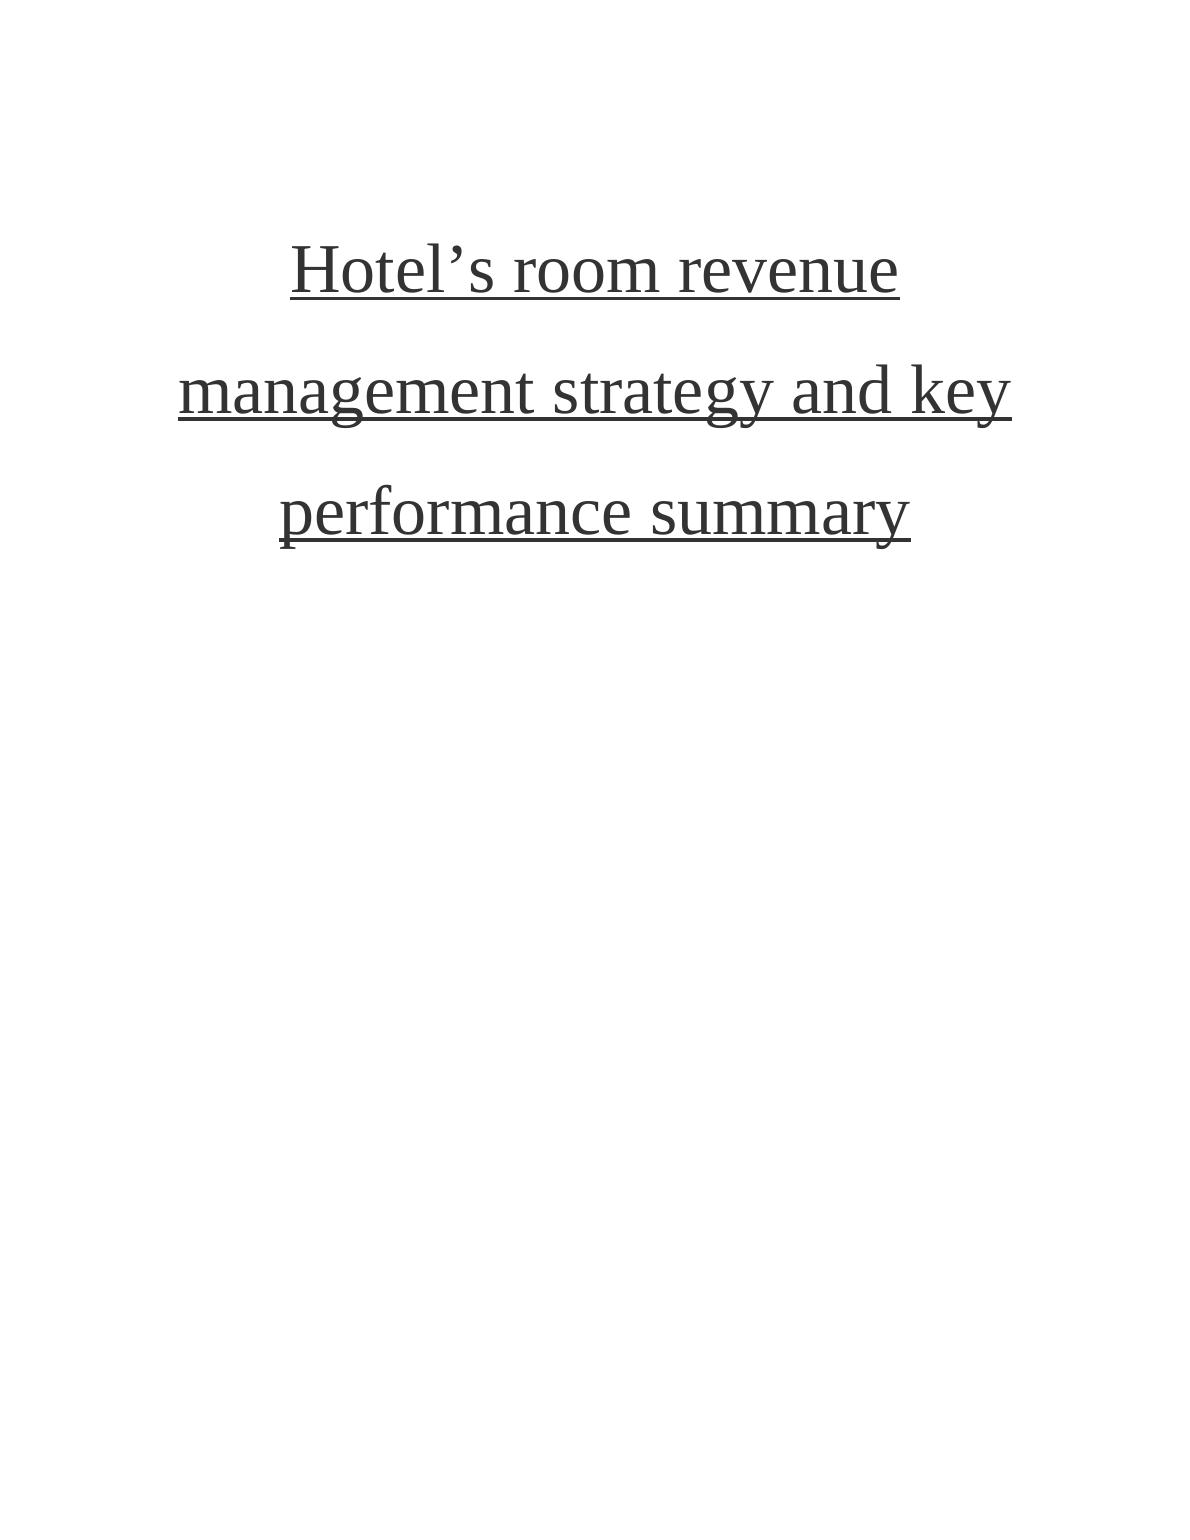 Hotel’s room revenue management strategy and key performance summary_1